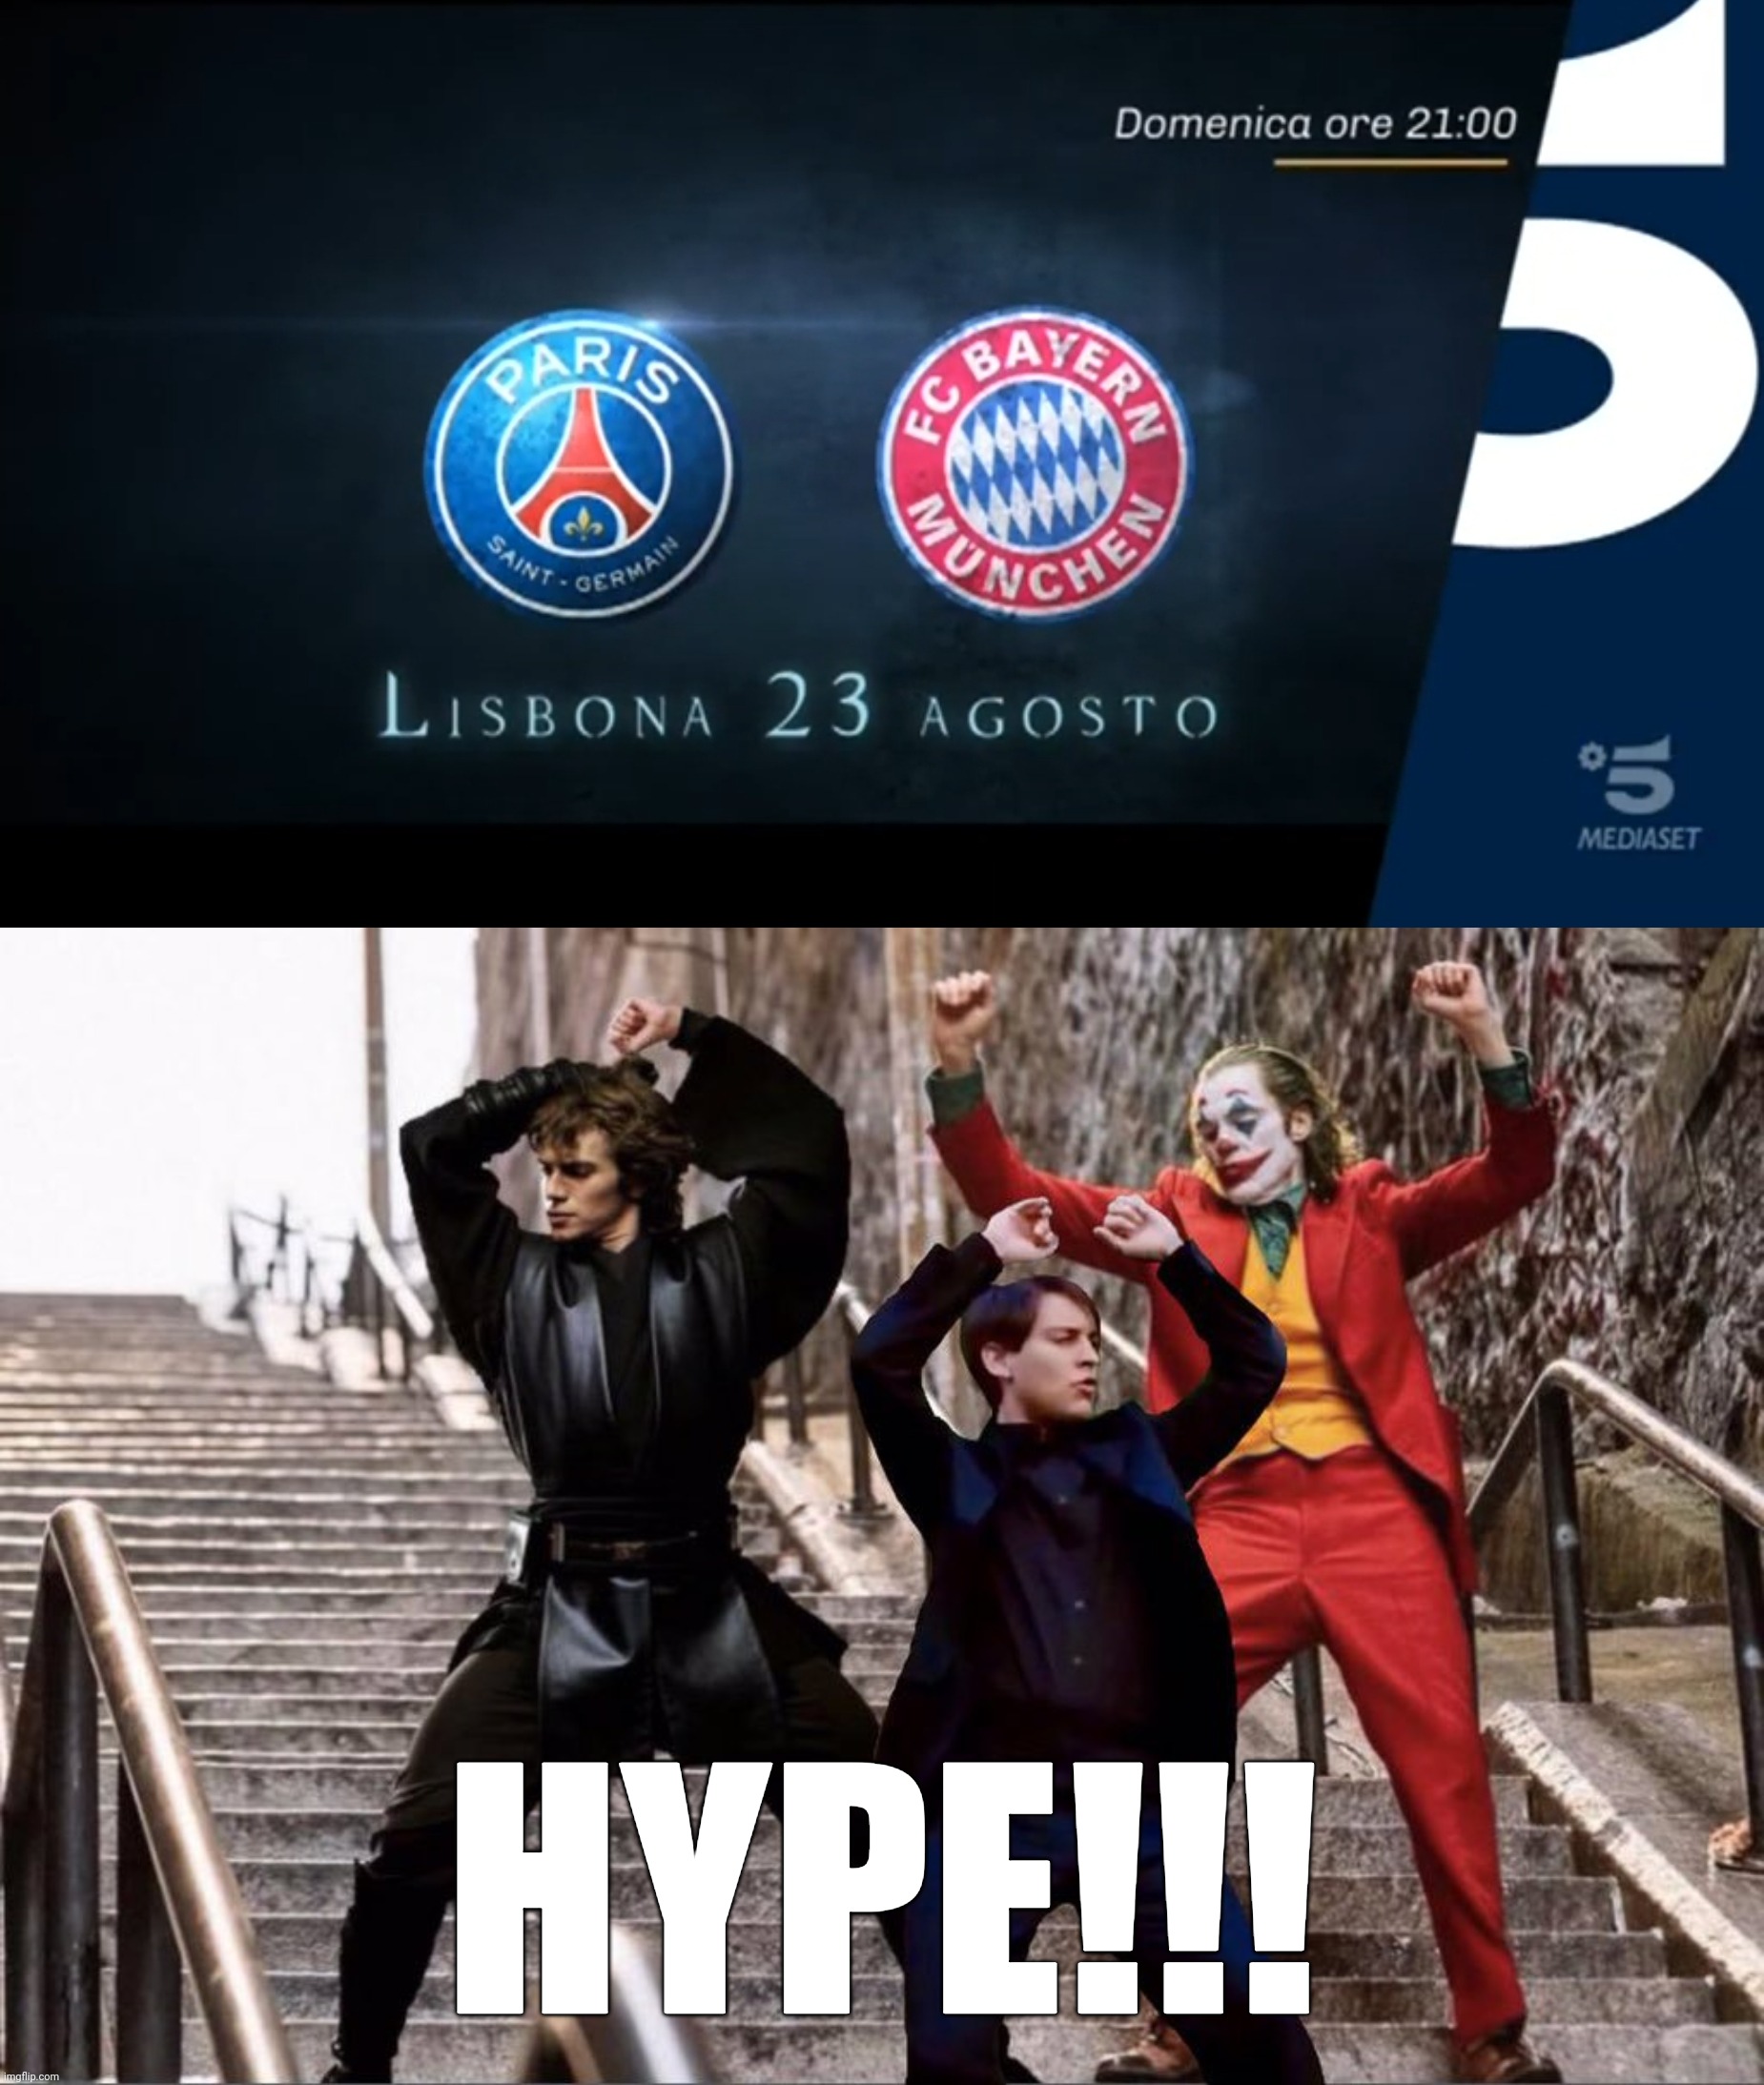 2 days to go! PSG-Bayern Munich Champions League final 2020 lisbon | HYPE!!! | image tagged in memes,funny,football,soccer,champions league,hype | made w/ Imgflip meme maker